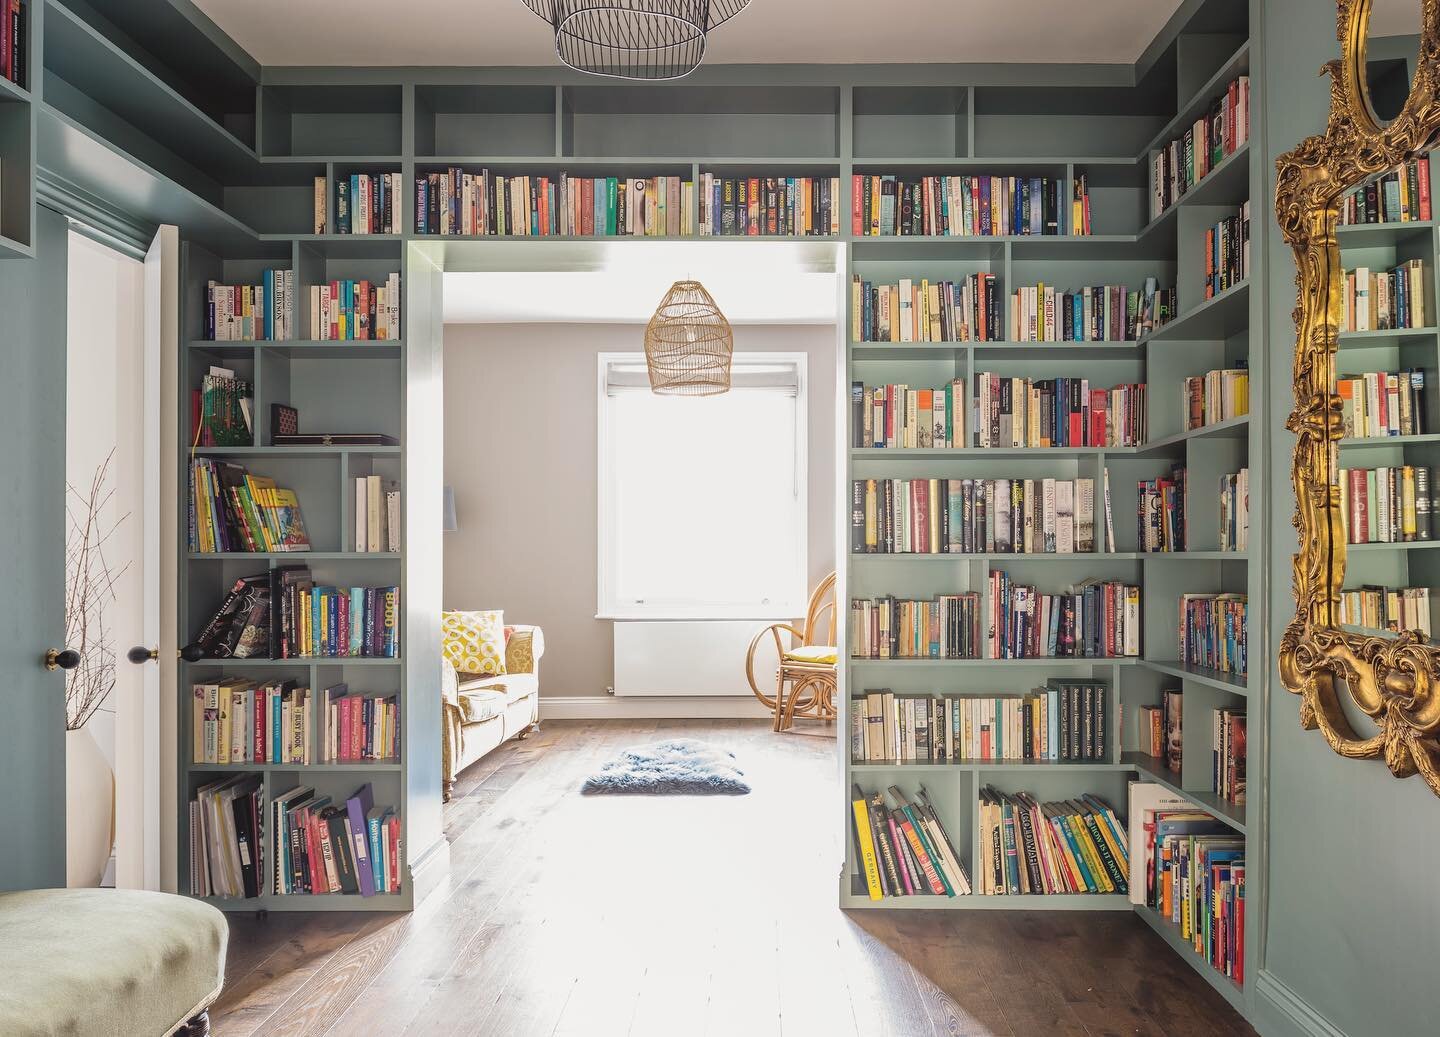 Who needs Netflix when you&rsquo;ve got this 
.
.
.
Swipe to see the before action 🙂
.
.
.
#fridaynightin #stayathome #staysafe #lockdown #read #library #readingroom #beforeandafter #interior #design #designer #interiors #joinery #madebyus #bespoke 